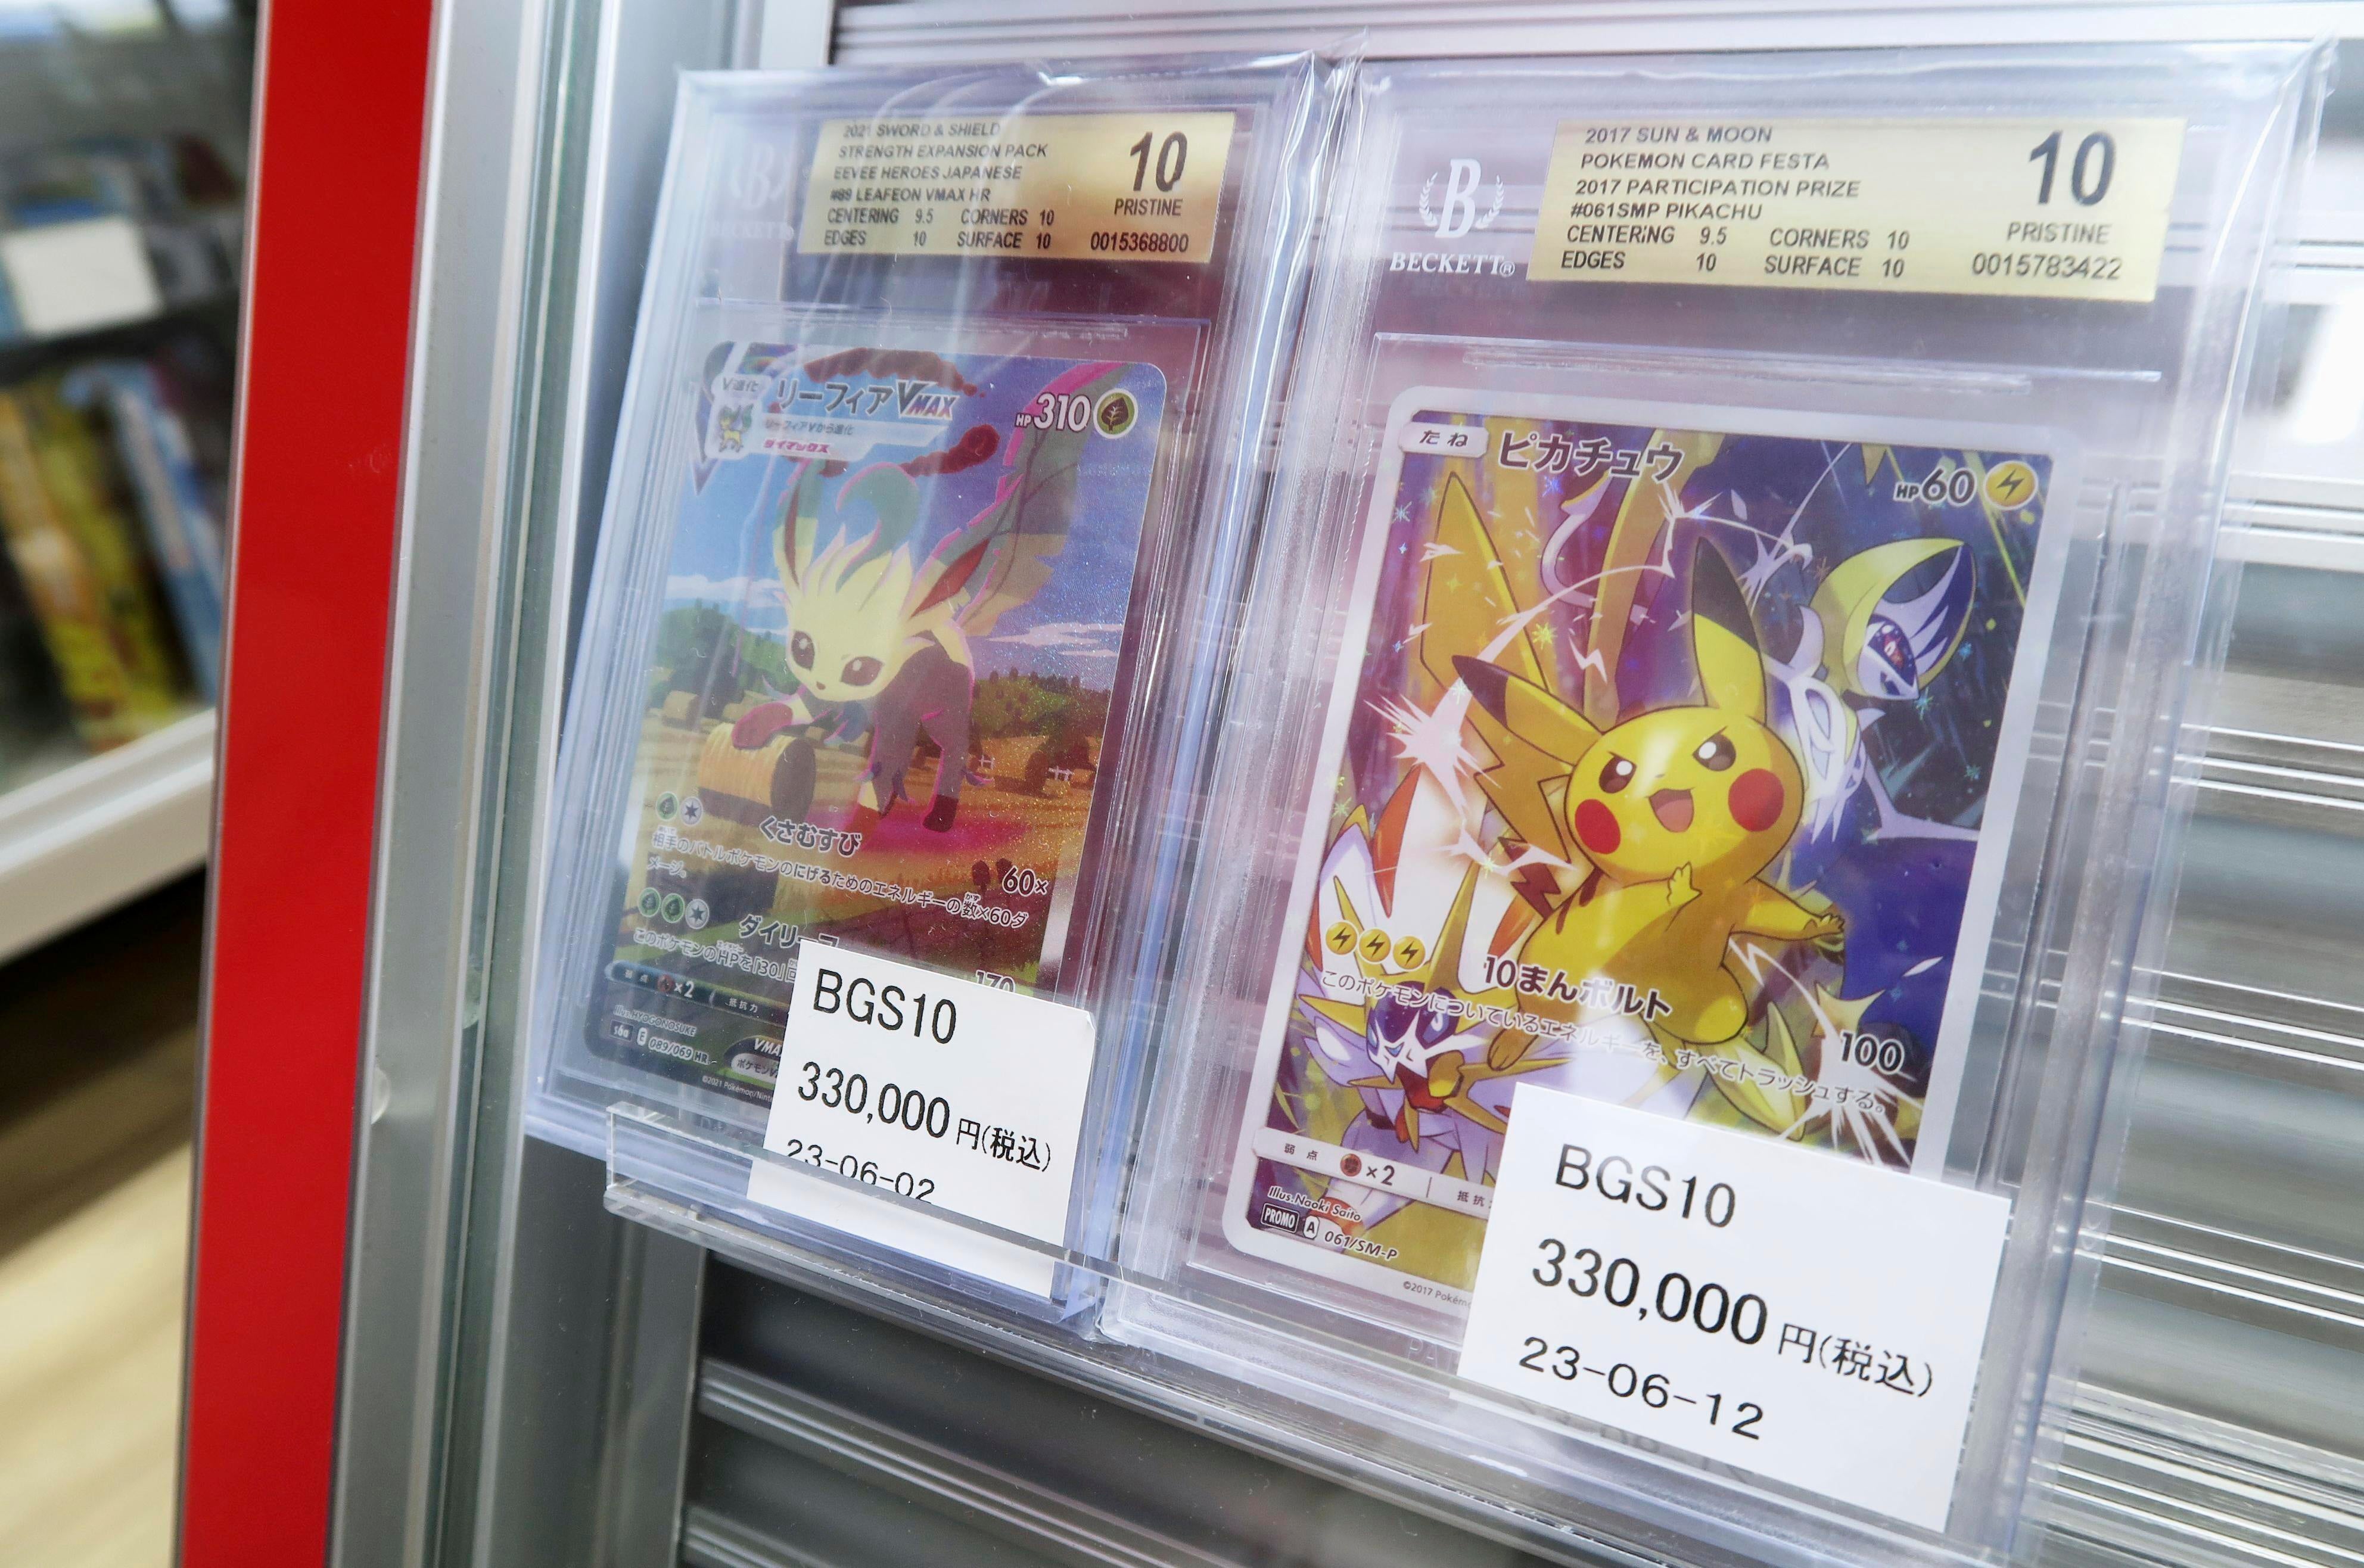 A senior member of yakuza was arrested for allegedly stealing Pokemon cards near Tokyo in April 2024, a case seen as an example of Japanese organized crime groups struggling with declining membership